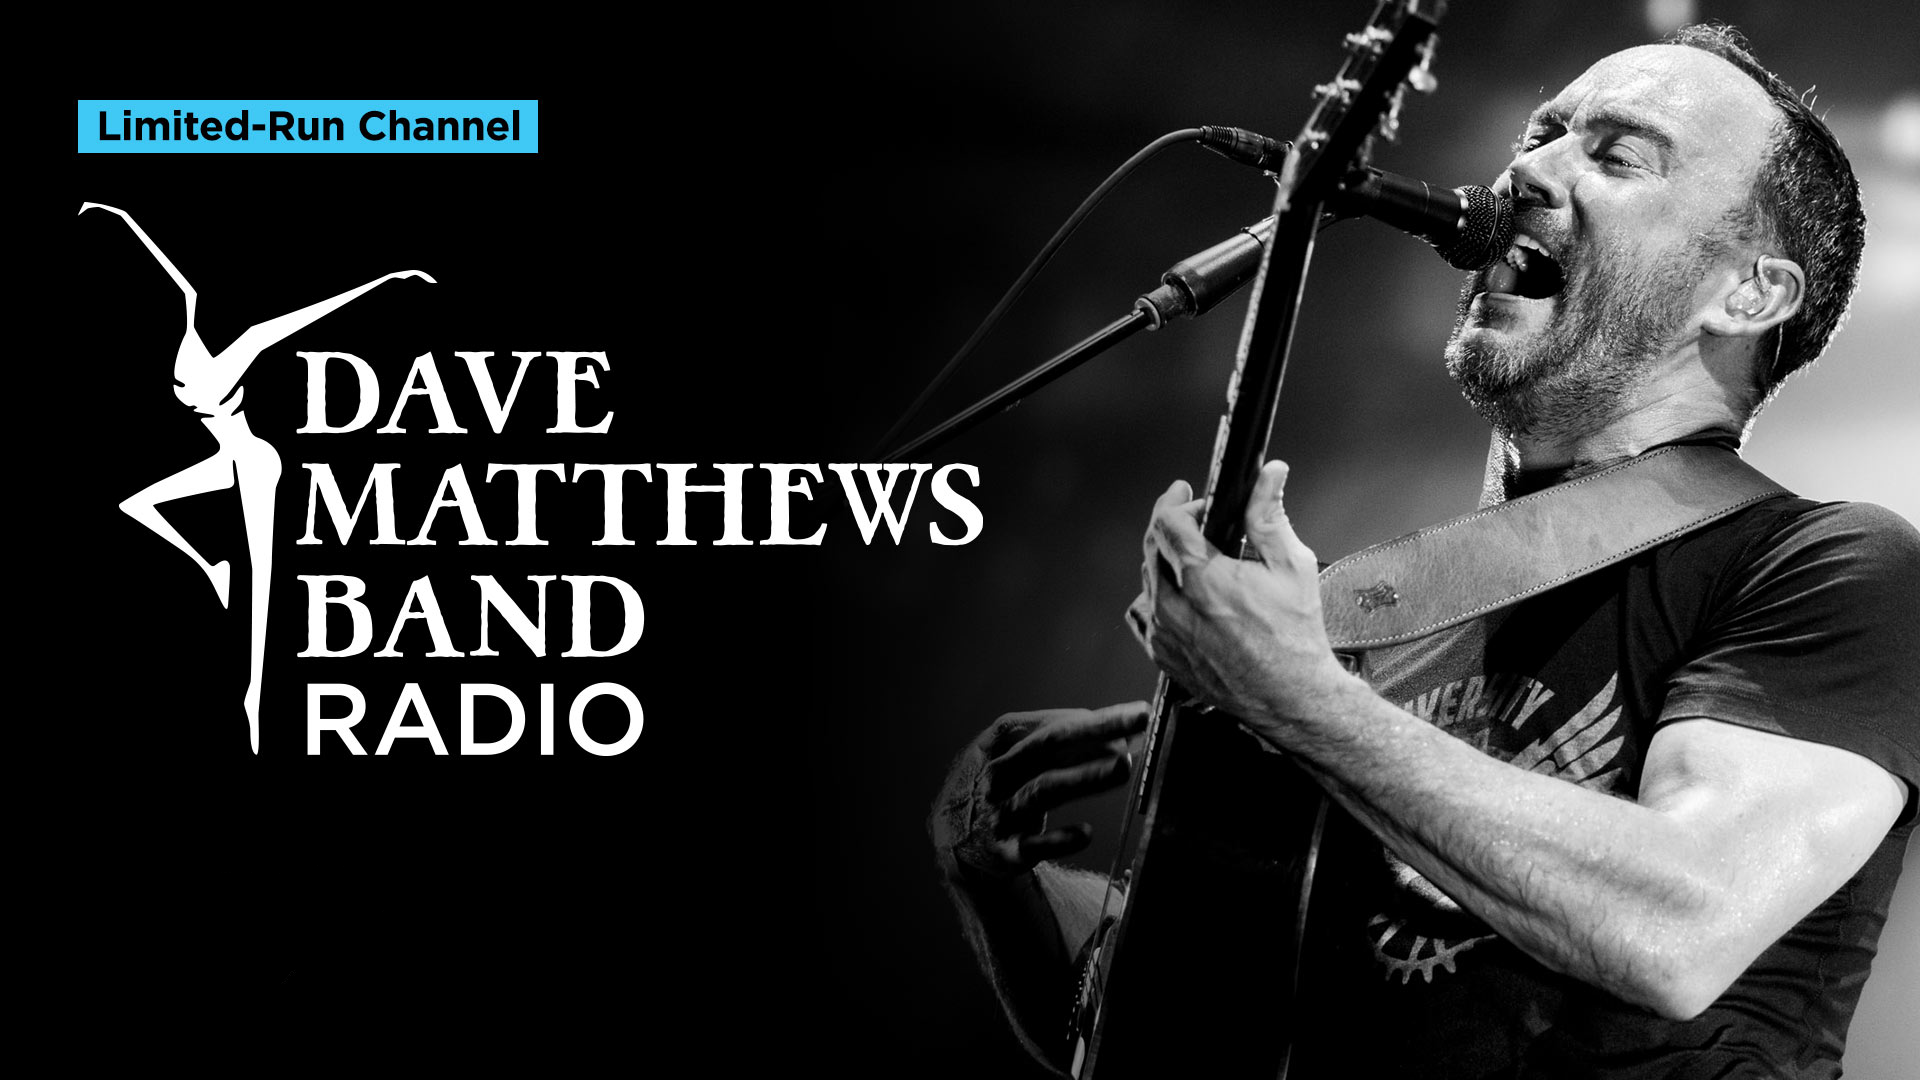 Hear Dave Matthews Band's Hits, Live Shows, Stories & More On Limited Run Channel. Hear & Now